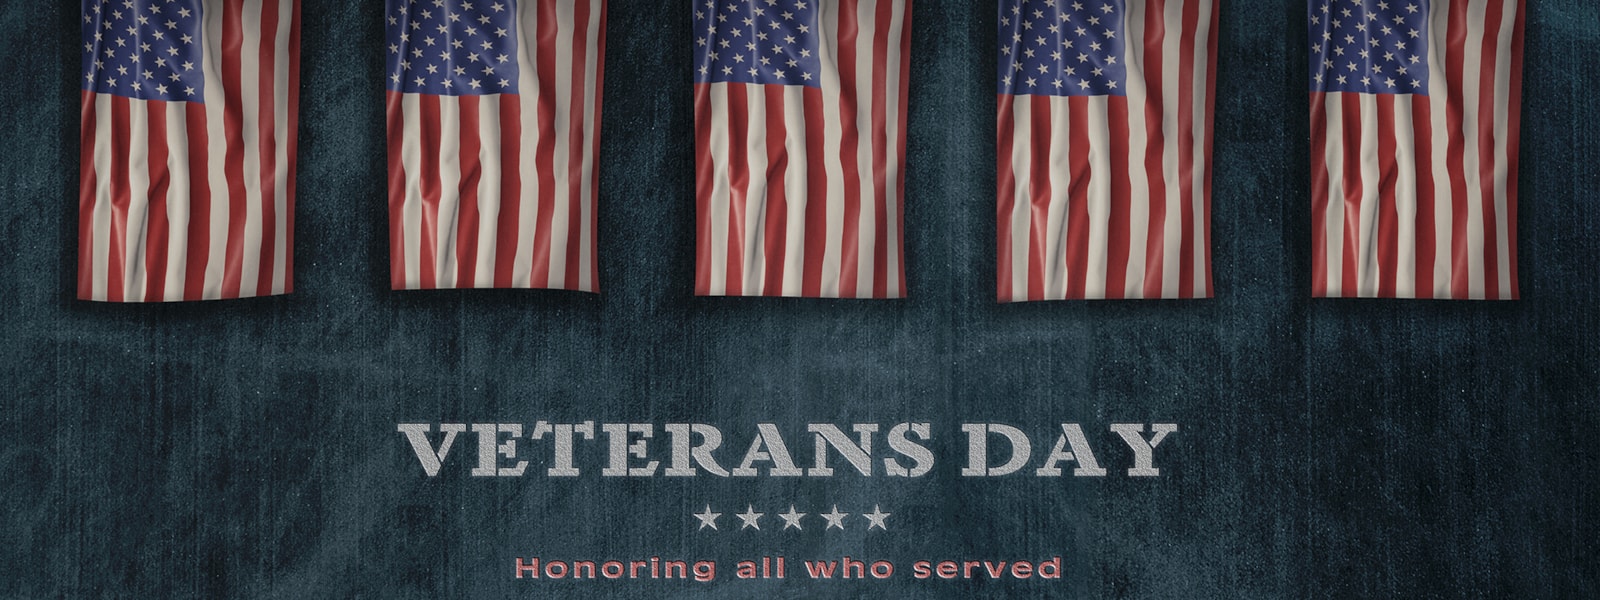 flags and veterans day (wording)